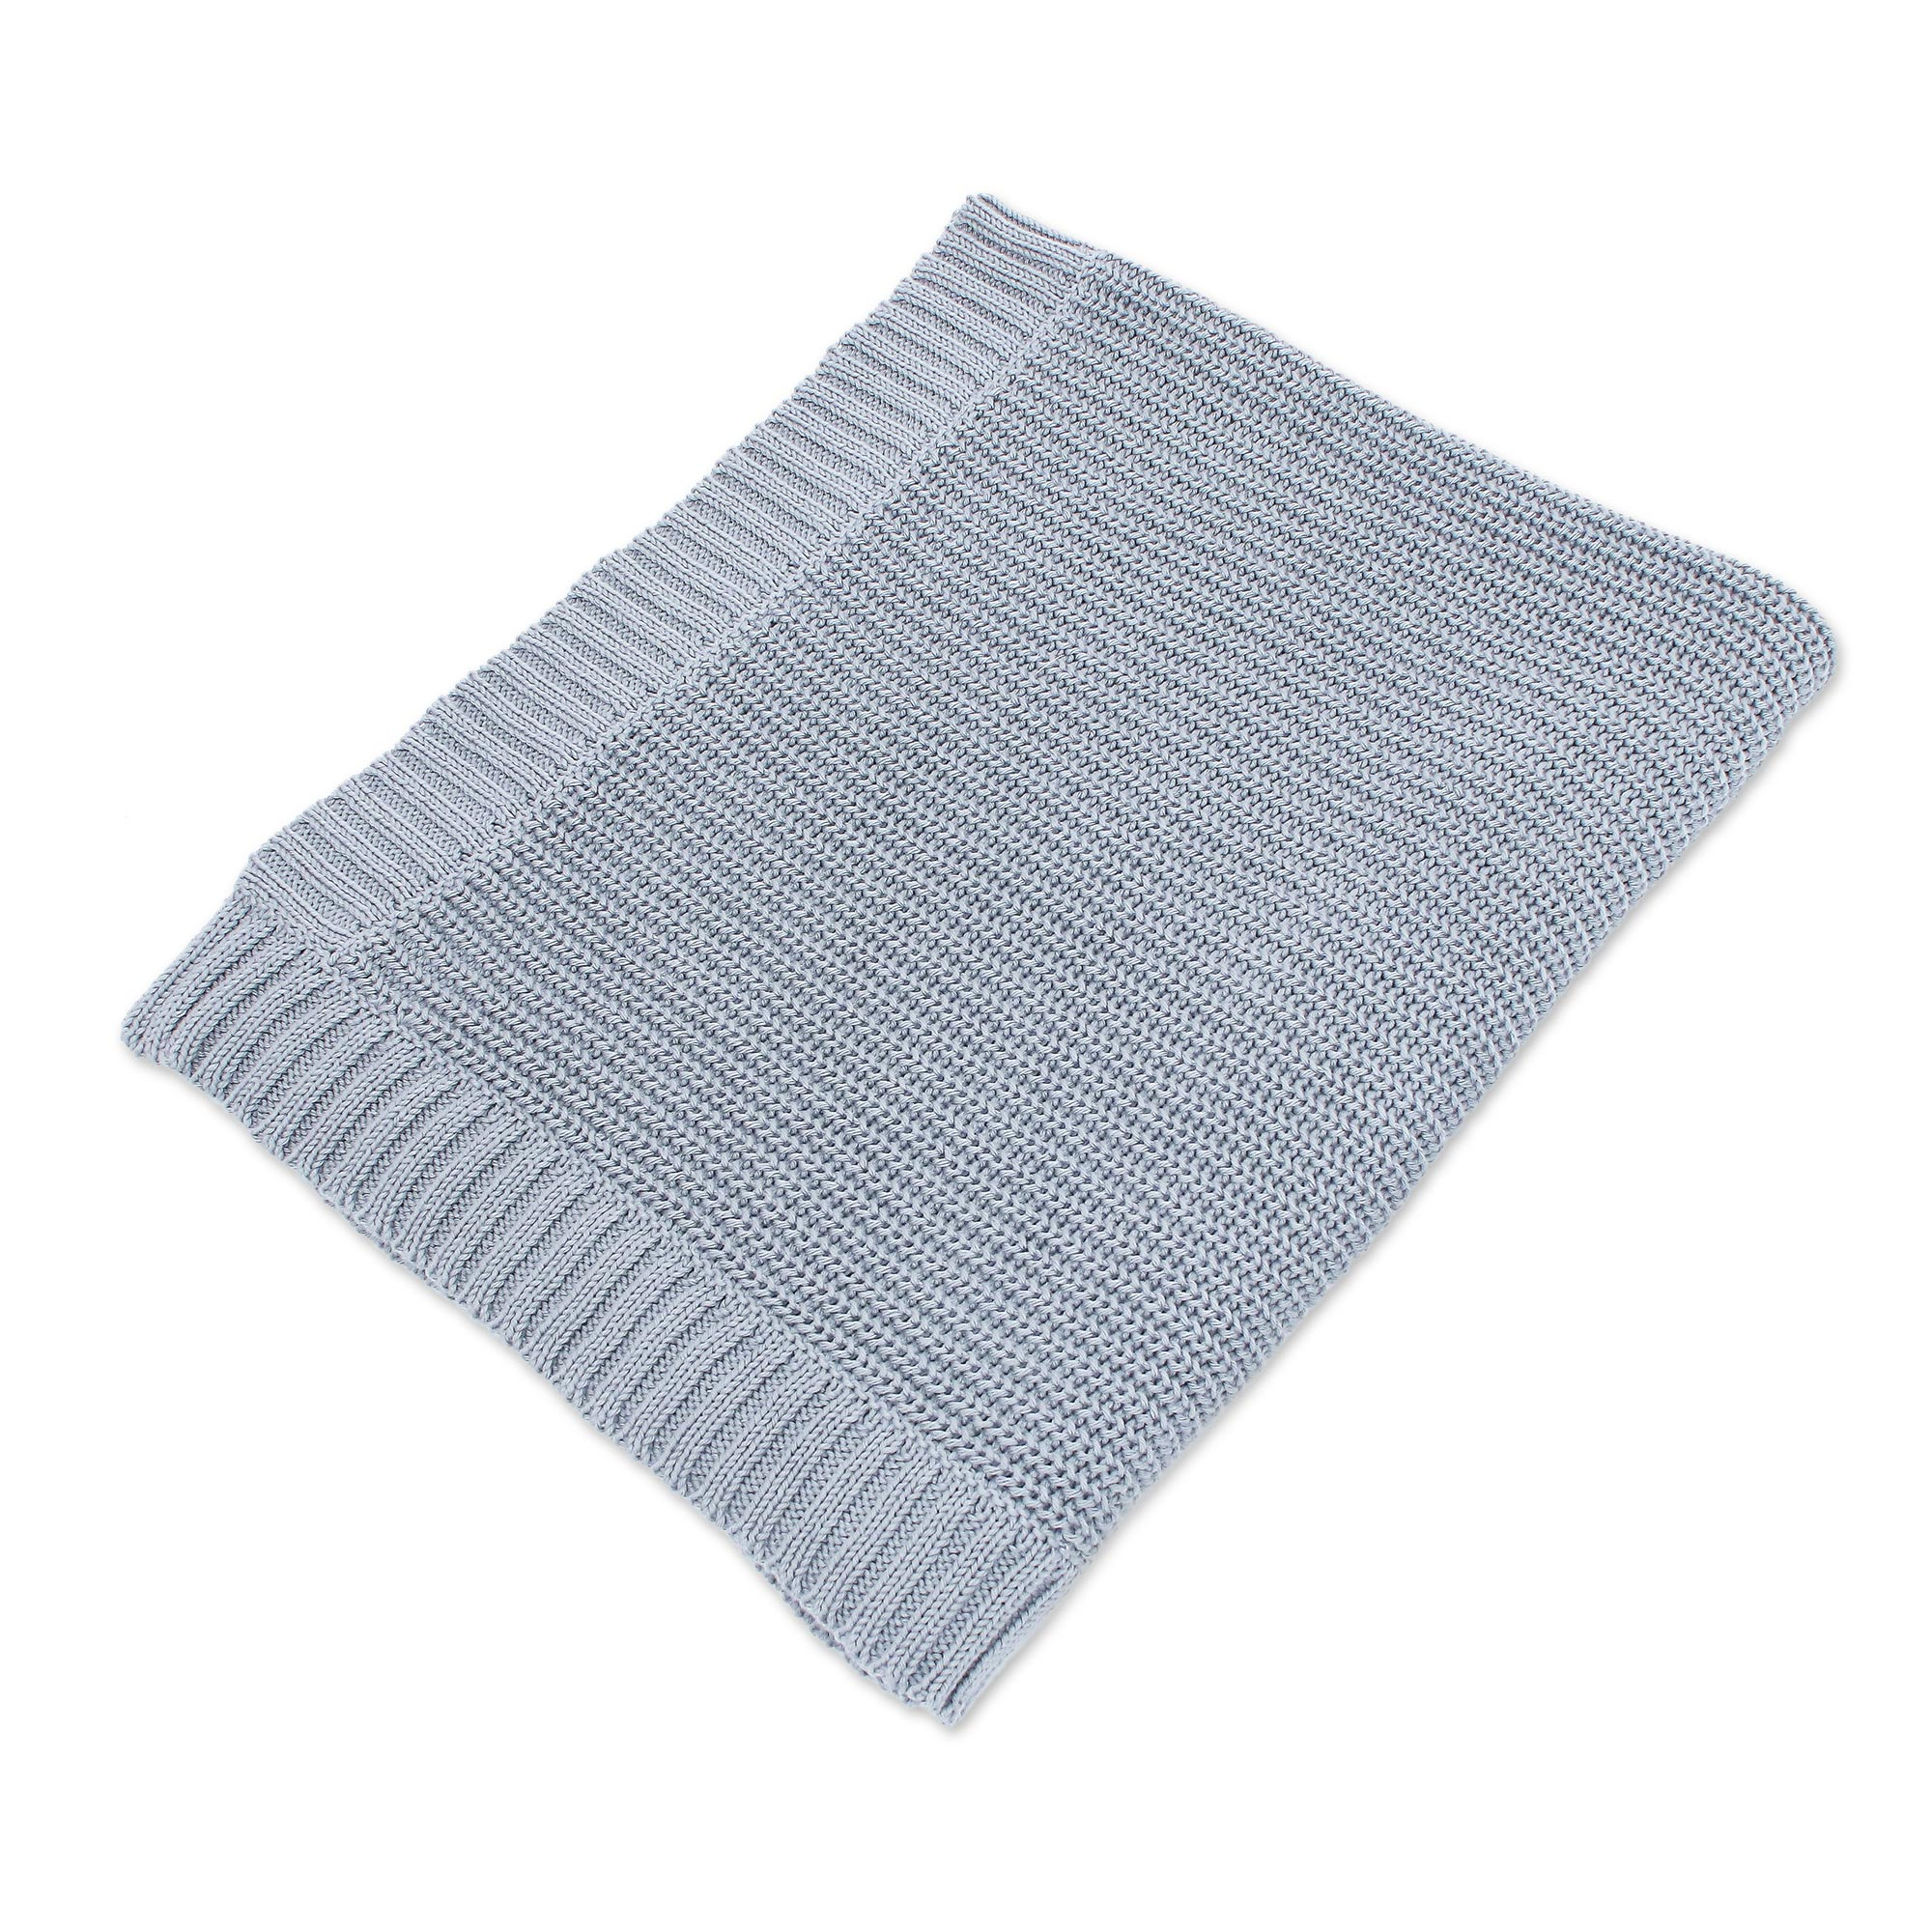 All Cotton Throw Blanket in Grey from Thailand - Grey Comfort | NOVICA